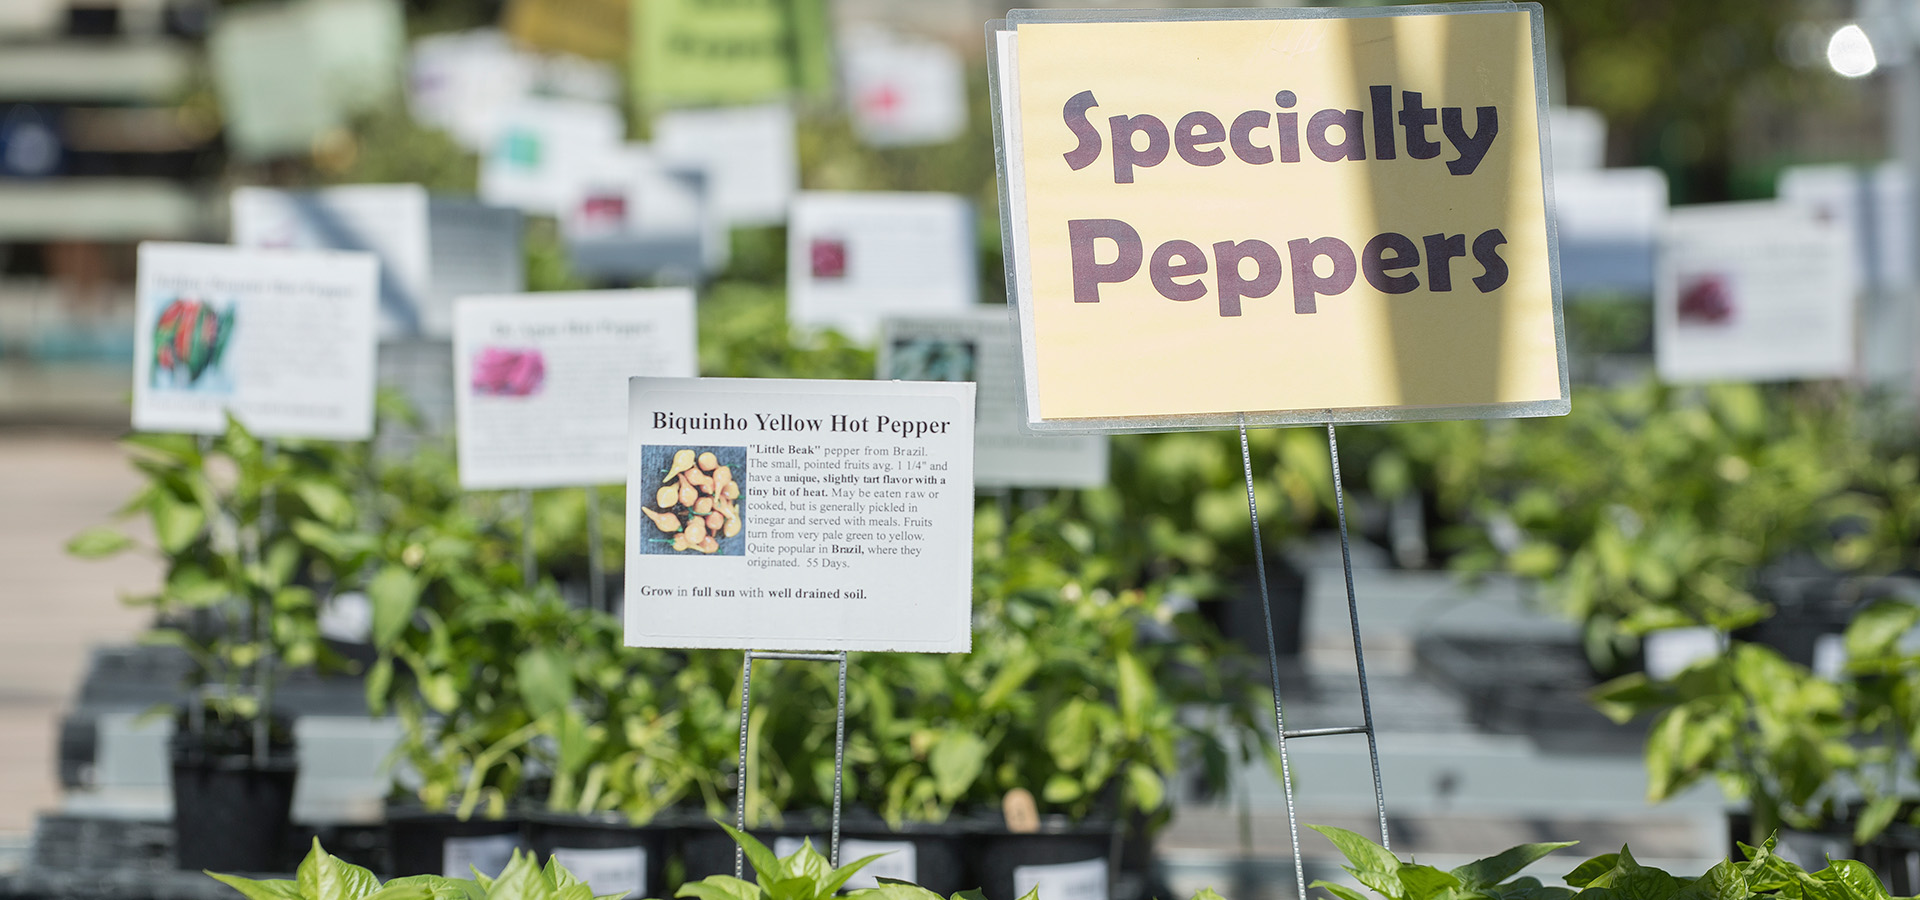 Pepper plants on sale at Farm Store